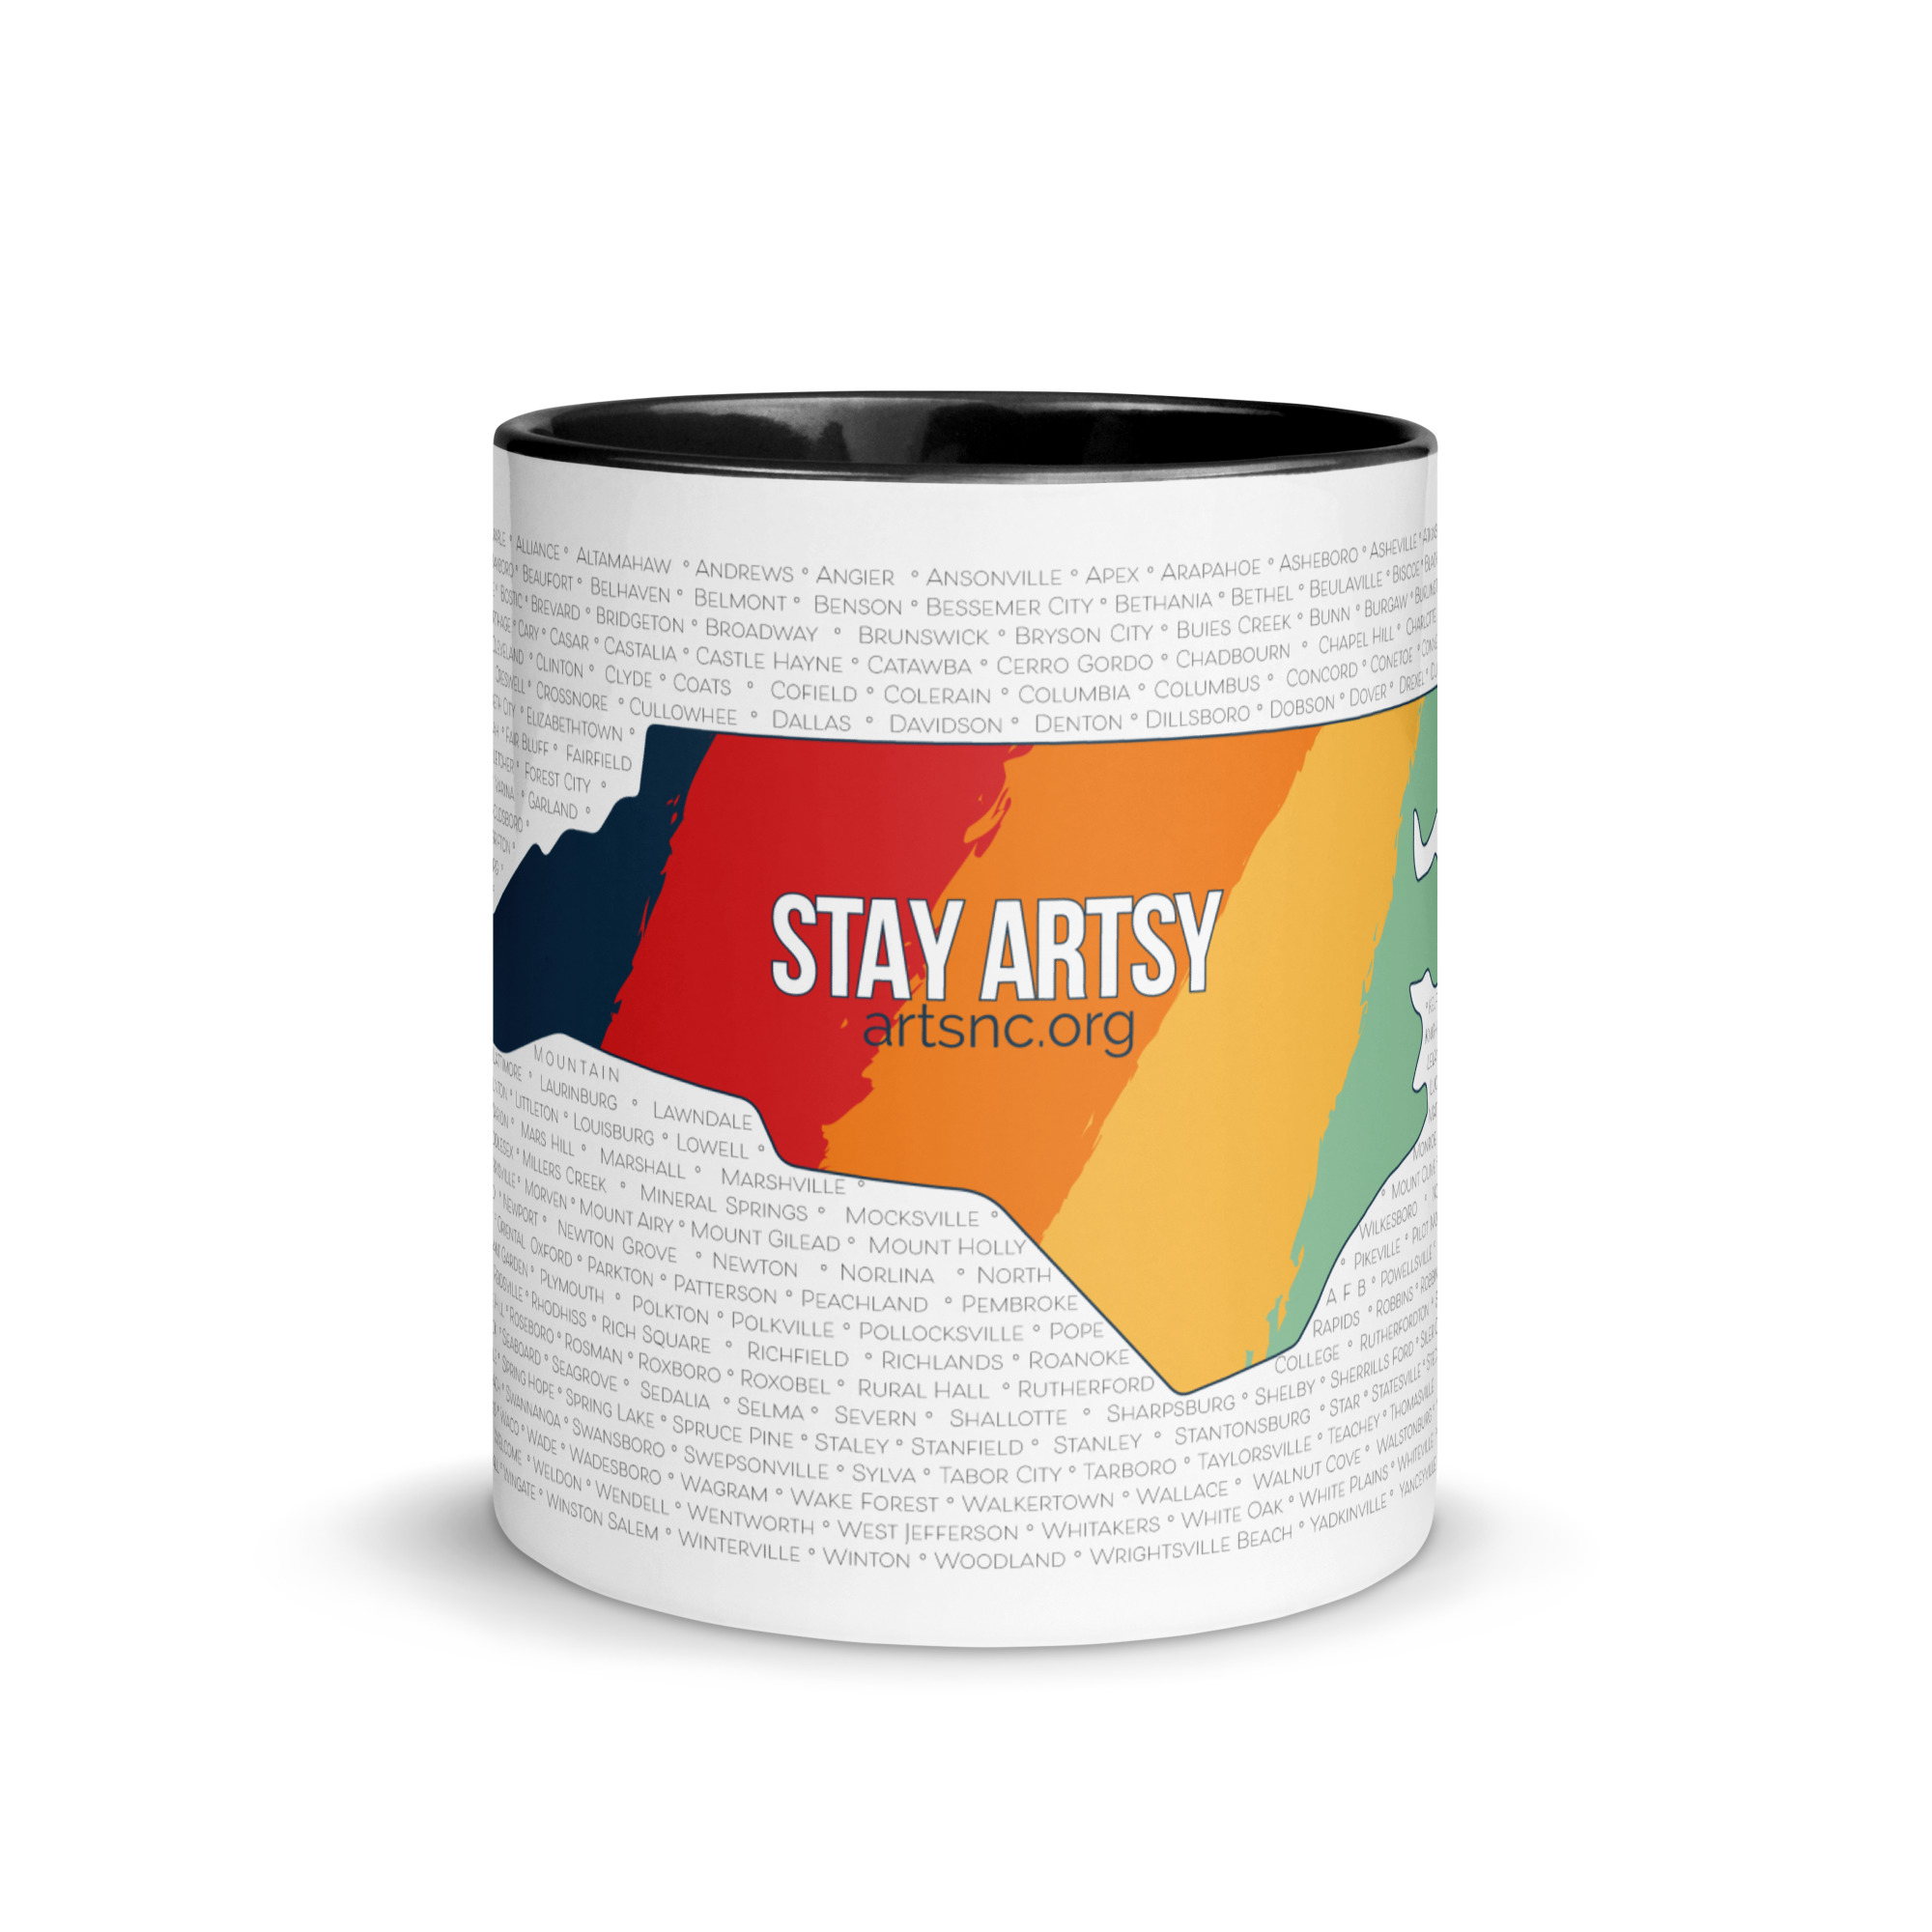 A white mug with black inside and a black handle. The outside of the mug is printed with NC state shape that has five vertical stripes - blue, red, orange, yellow and light green. Text in the center says "Stay Artsy". In the background are rows of NC county and city names.